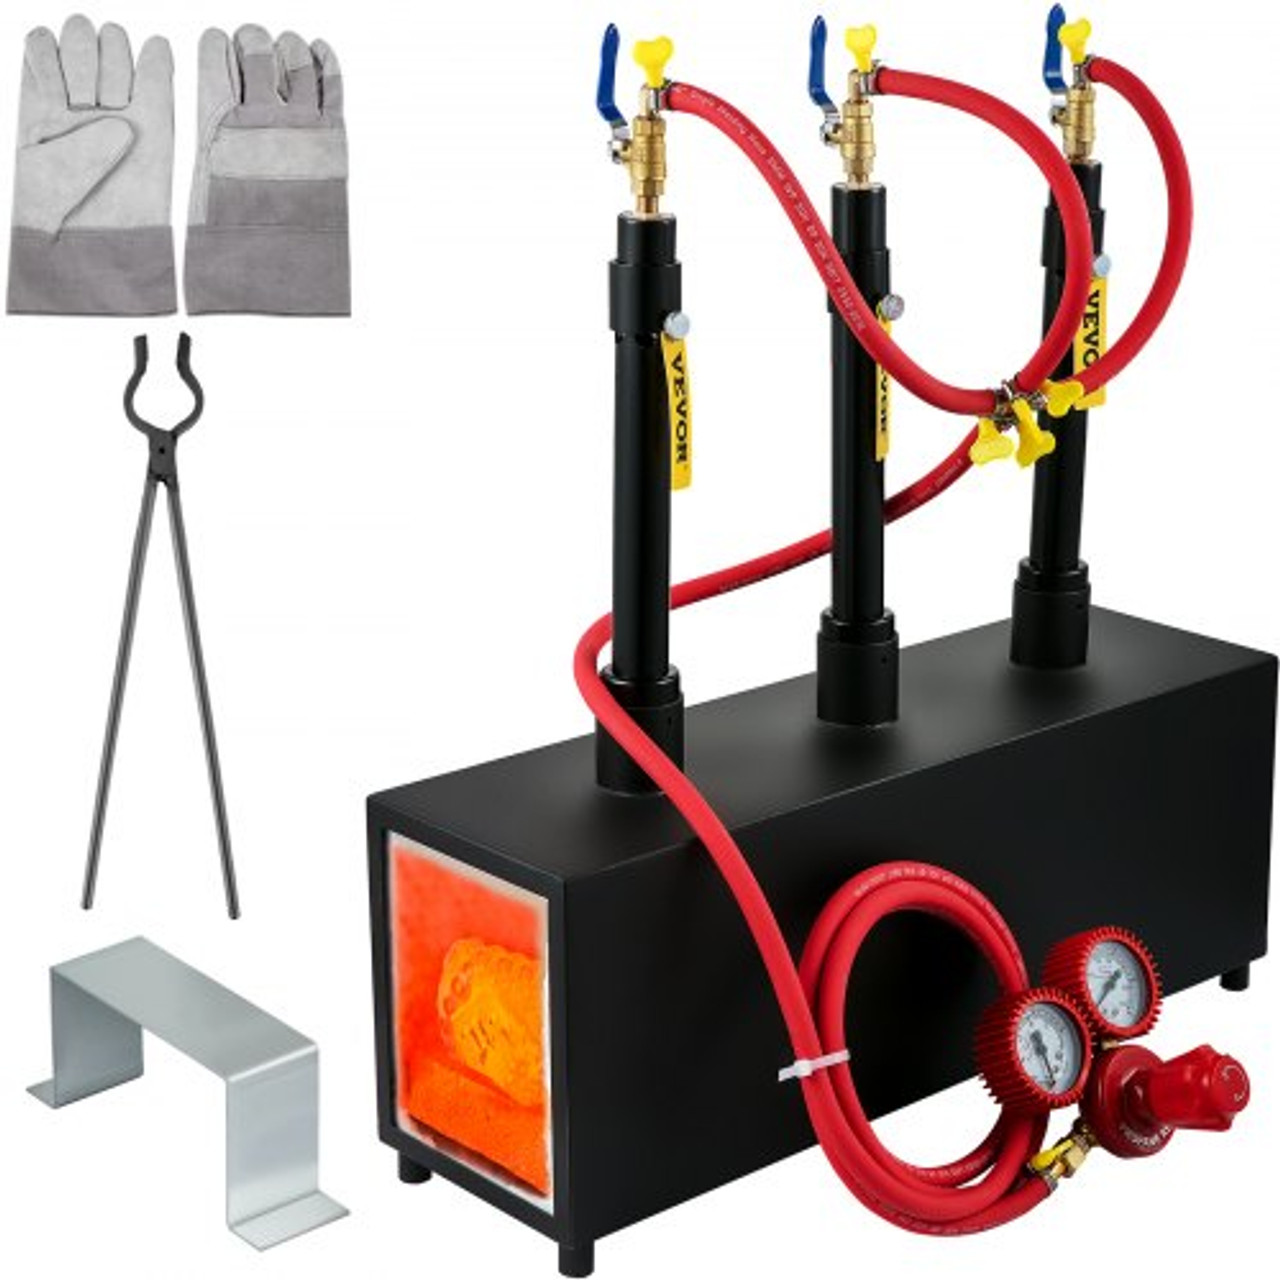 Portable Propane Forge Three Burners and Open Structure, Propane Burner Forge Large Capacity, Square Metal Blacksmithing Forge for Knife and Tool Making Equipment